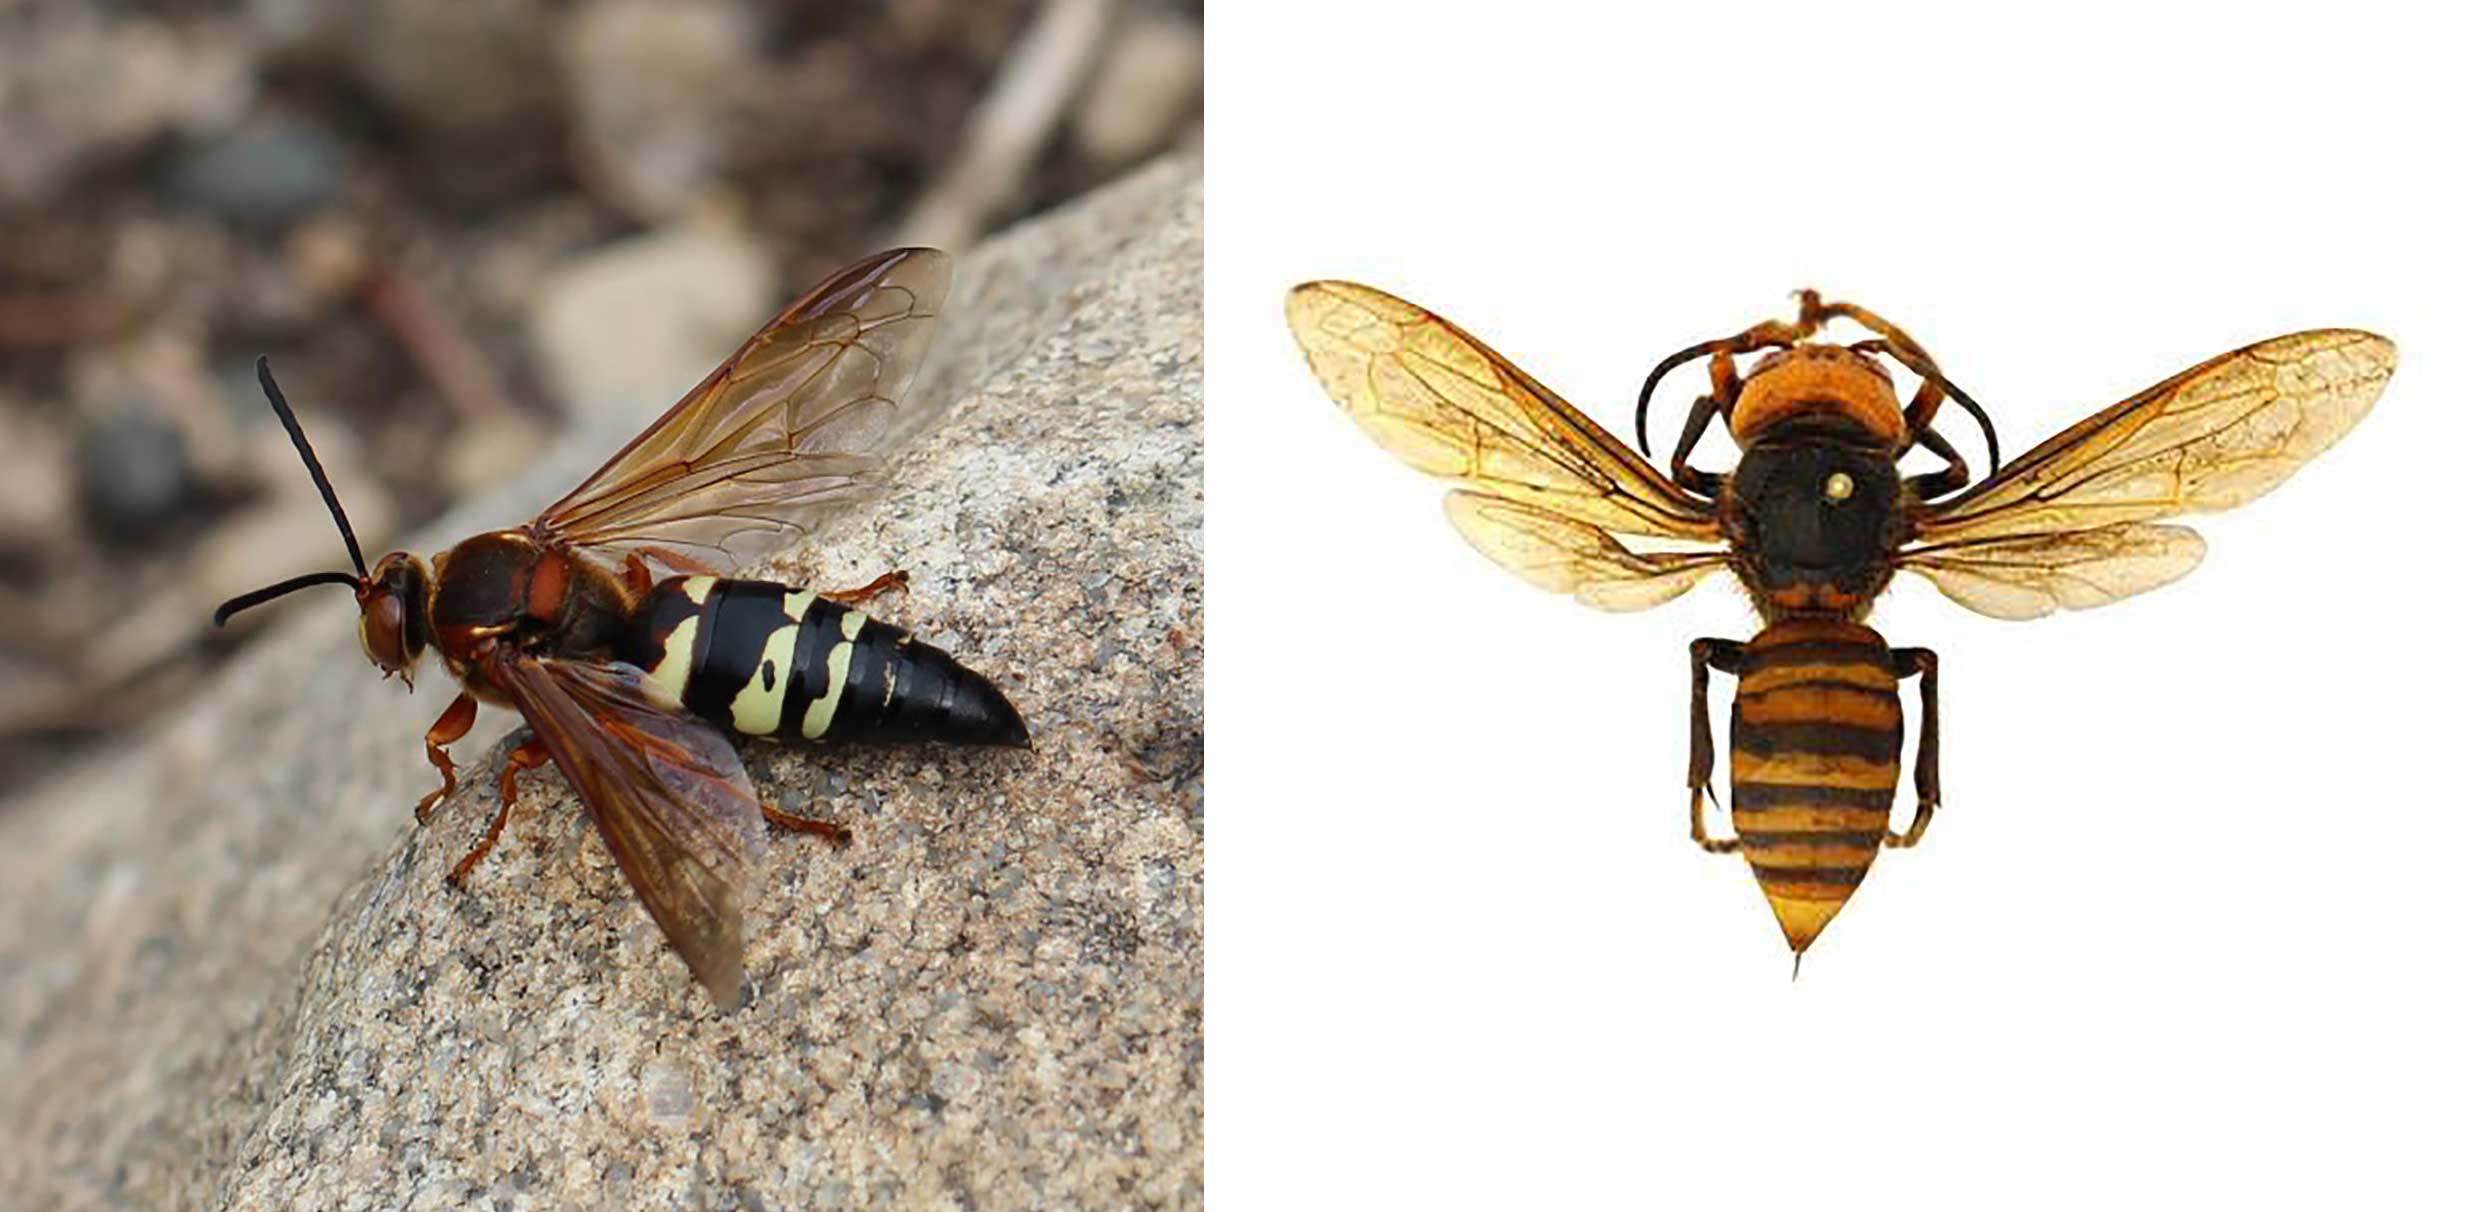 Two insects. The left is a wasp with a dark head, reddish brown thorax (the segment behind the head), and a black and yellow banded abdomen. The right is a hornet with a yellow head, dark brown thorax (the segment behind the head), and a brown and yellow banded abdomen.